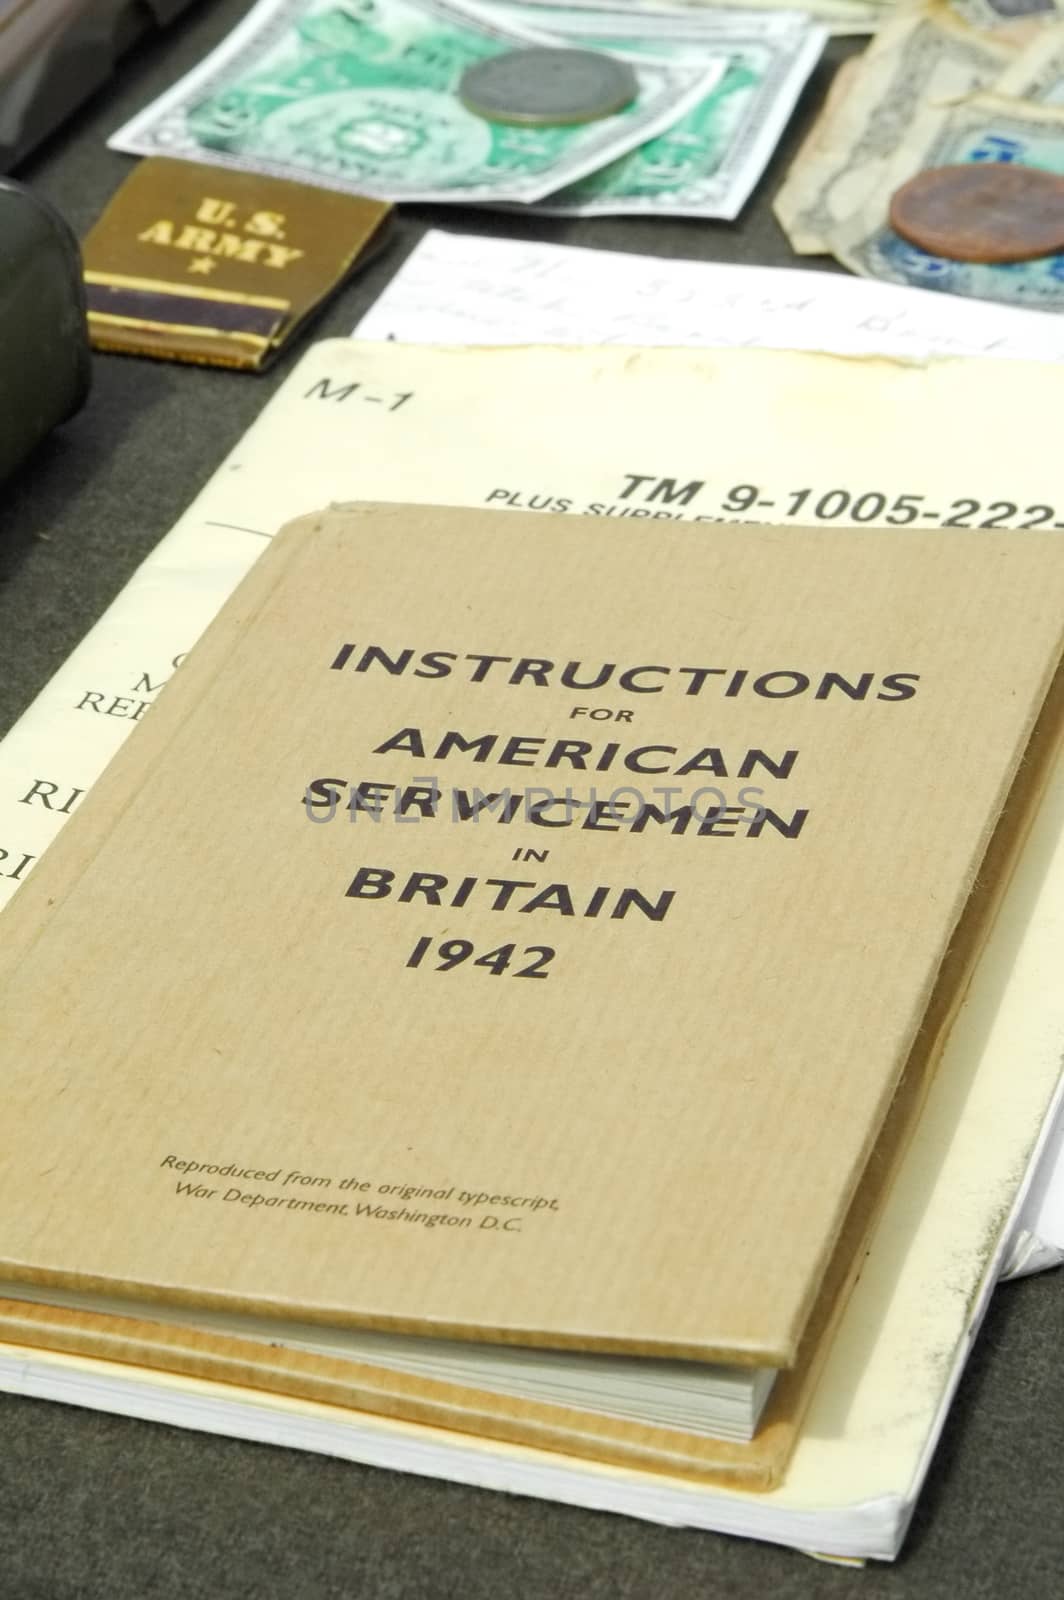 military instruction booklet and other memorabilia from 1942